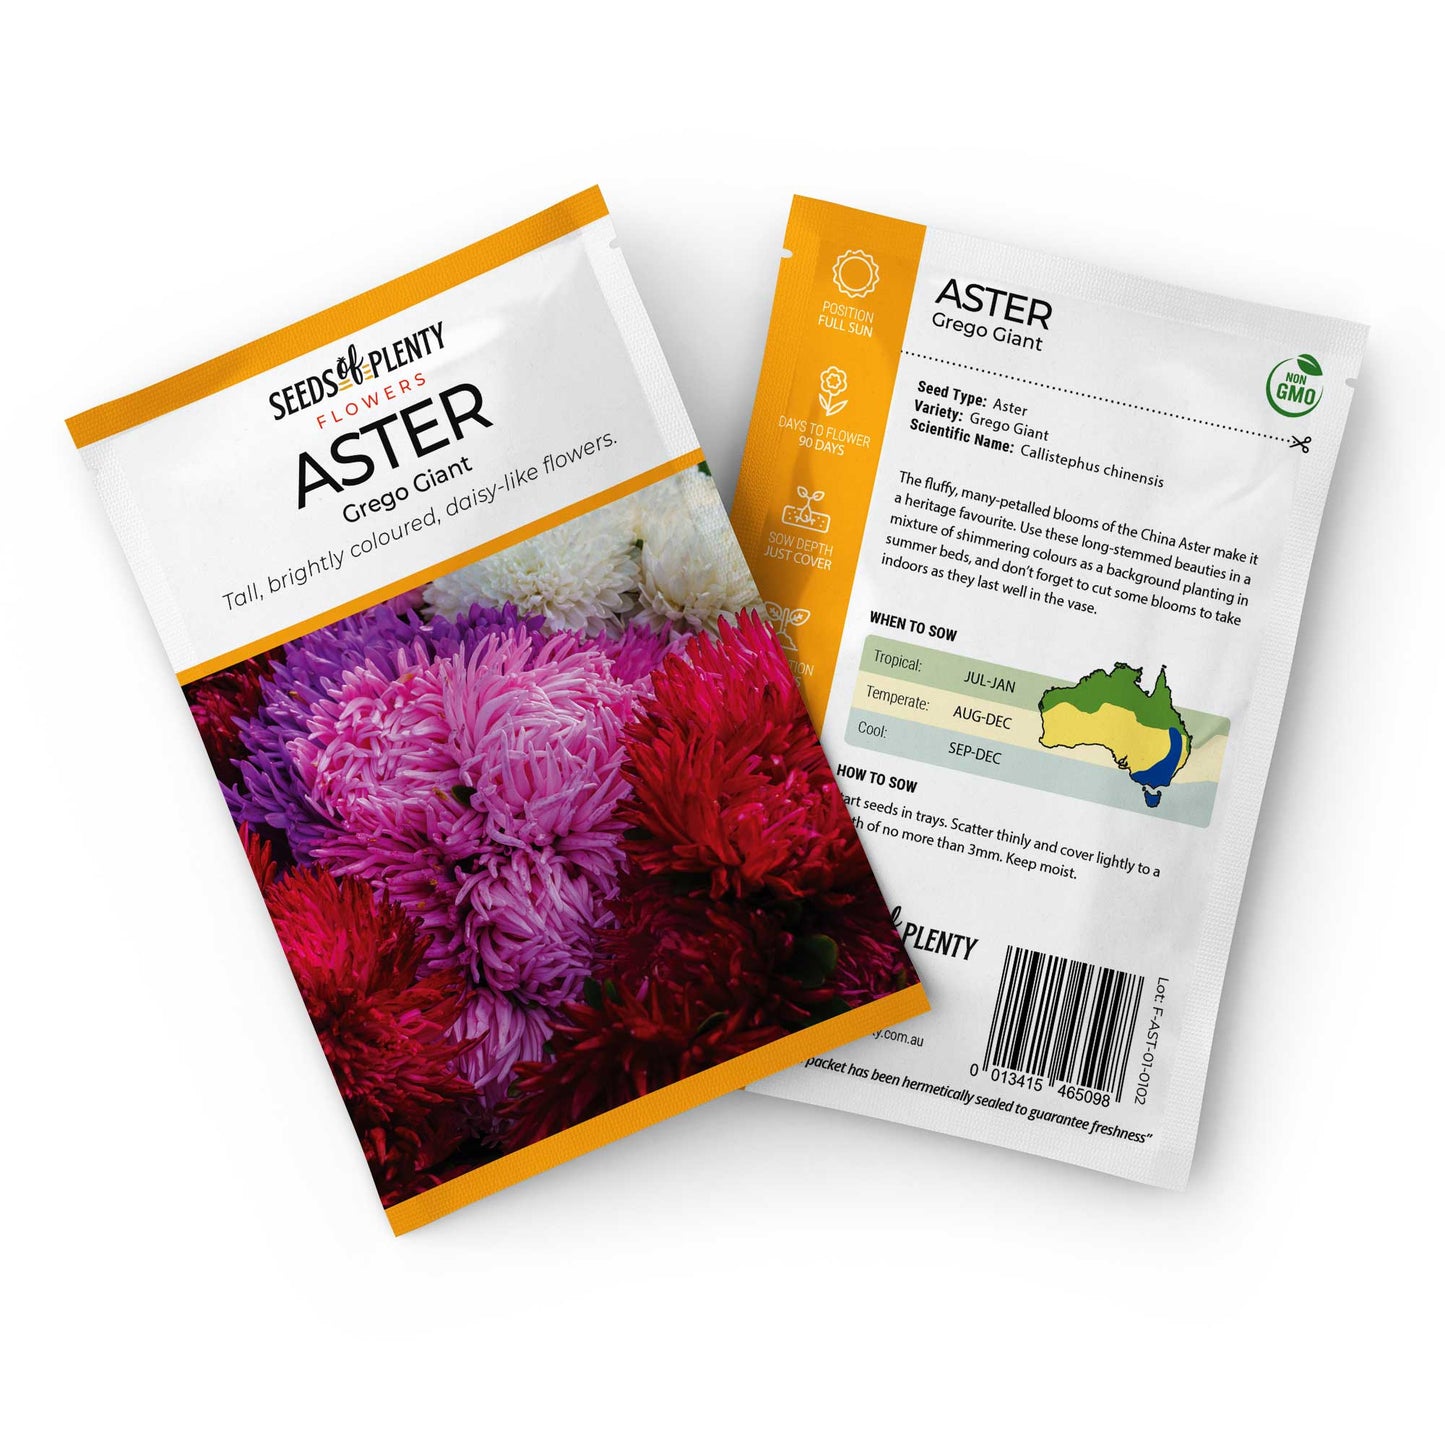 ASTER - Grego Giant